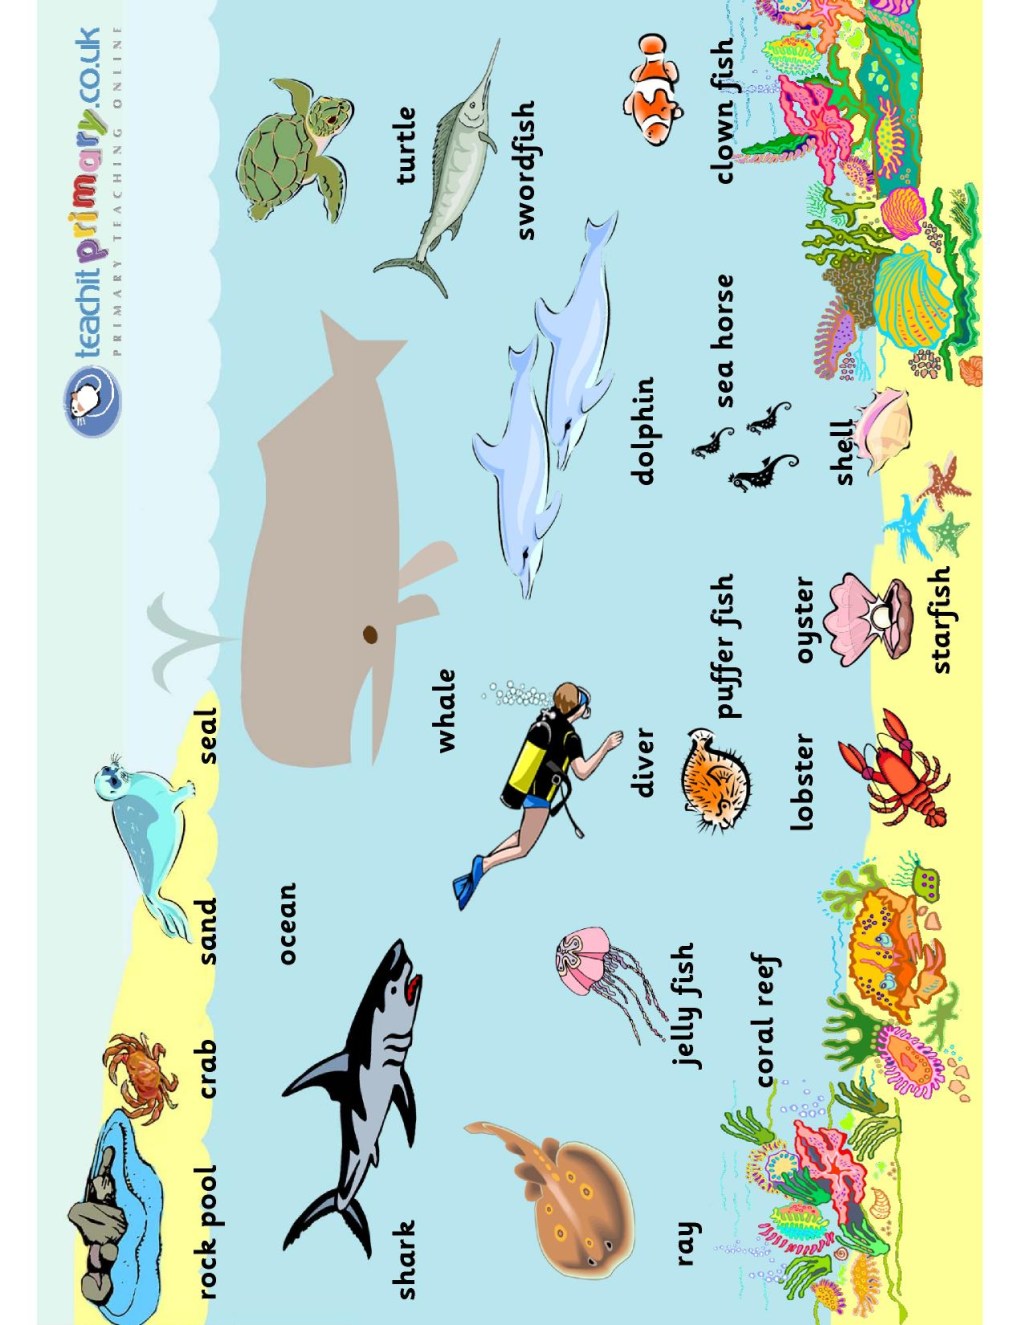 Picture of: The sea – word mat  KS-KS  Living things and their habitats